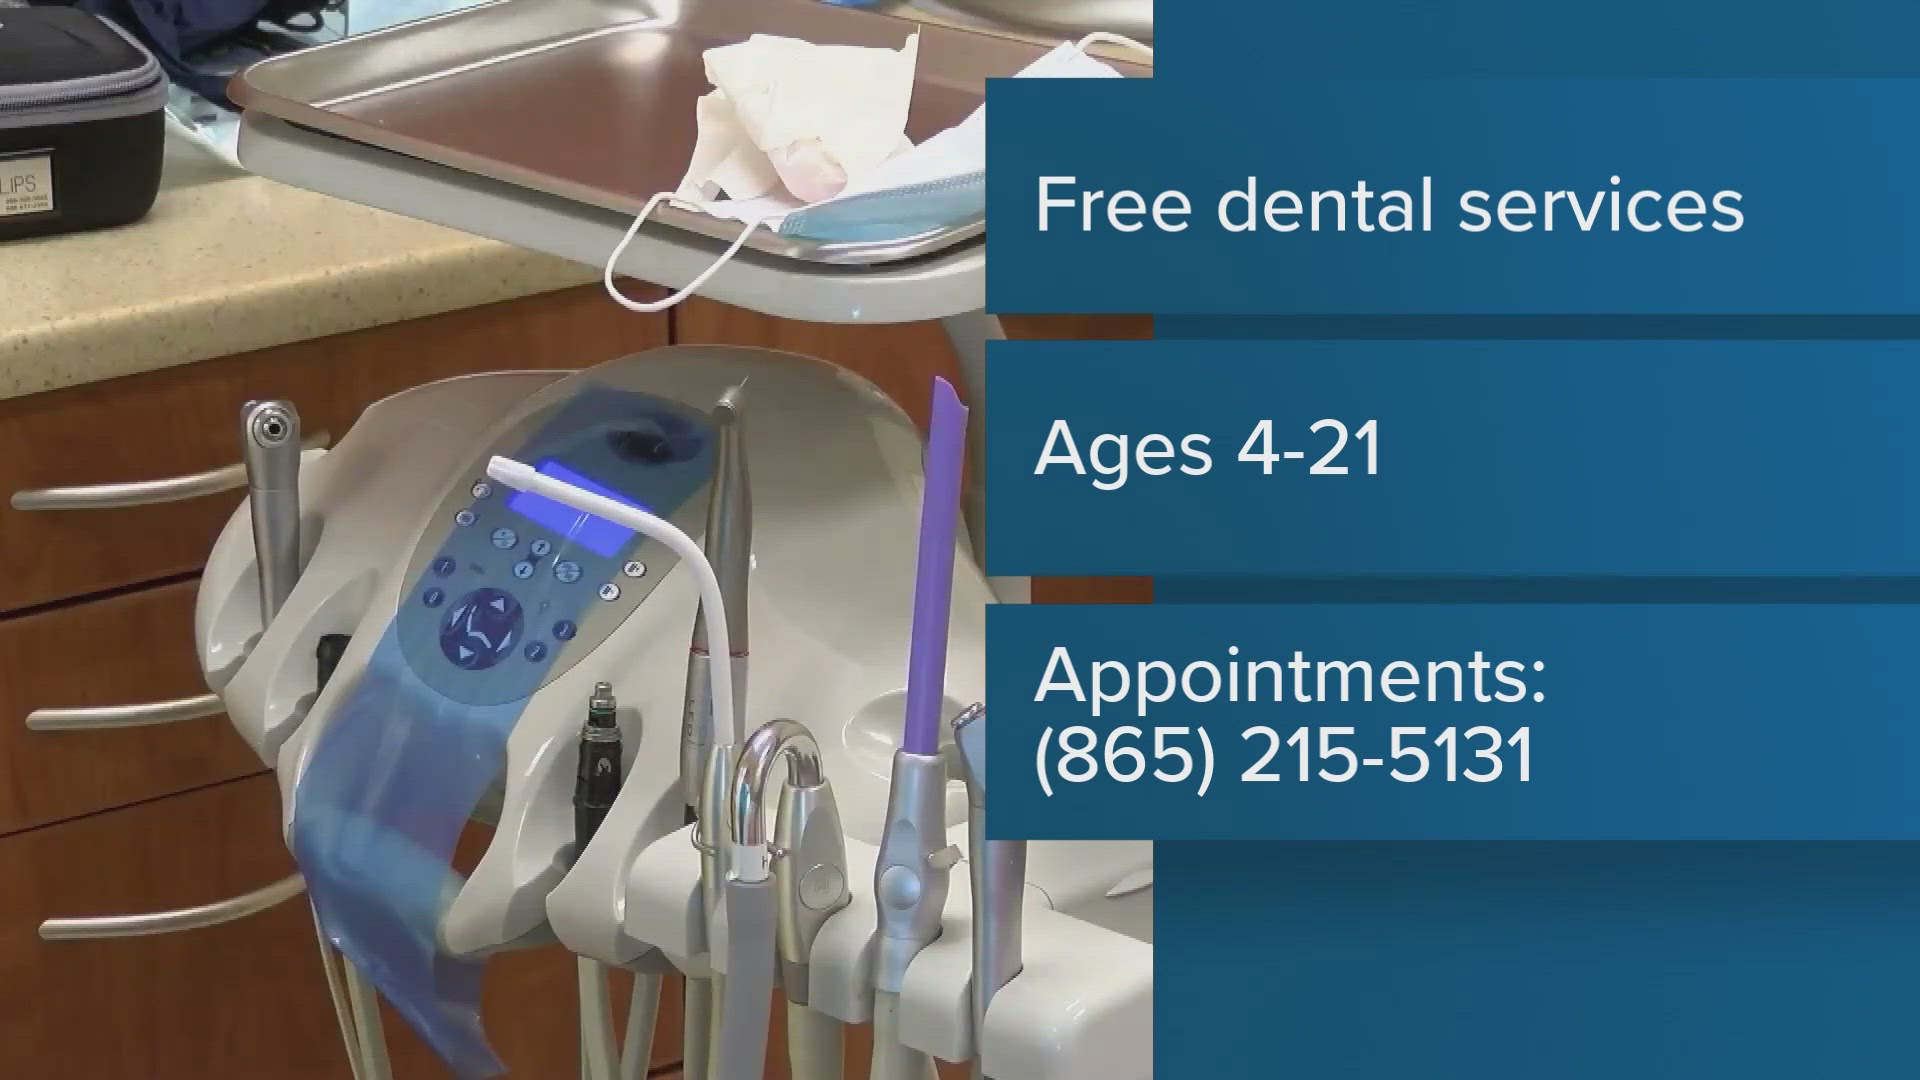 Ages 4 to 21 can receive several services including education, screenings, sealants and fluoride varnish, according to the Knox County Health Department.